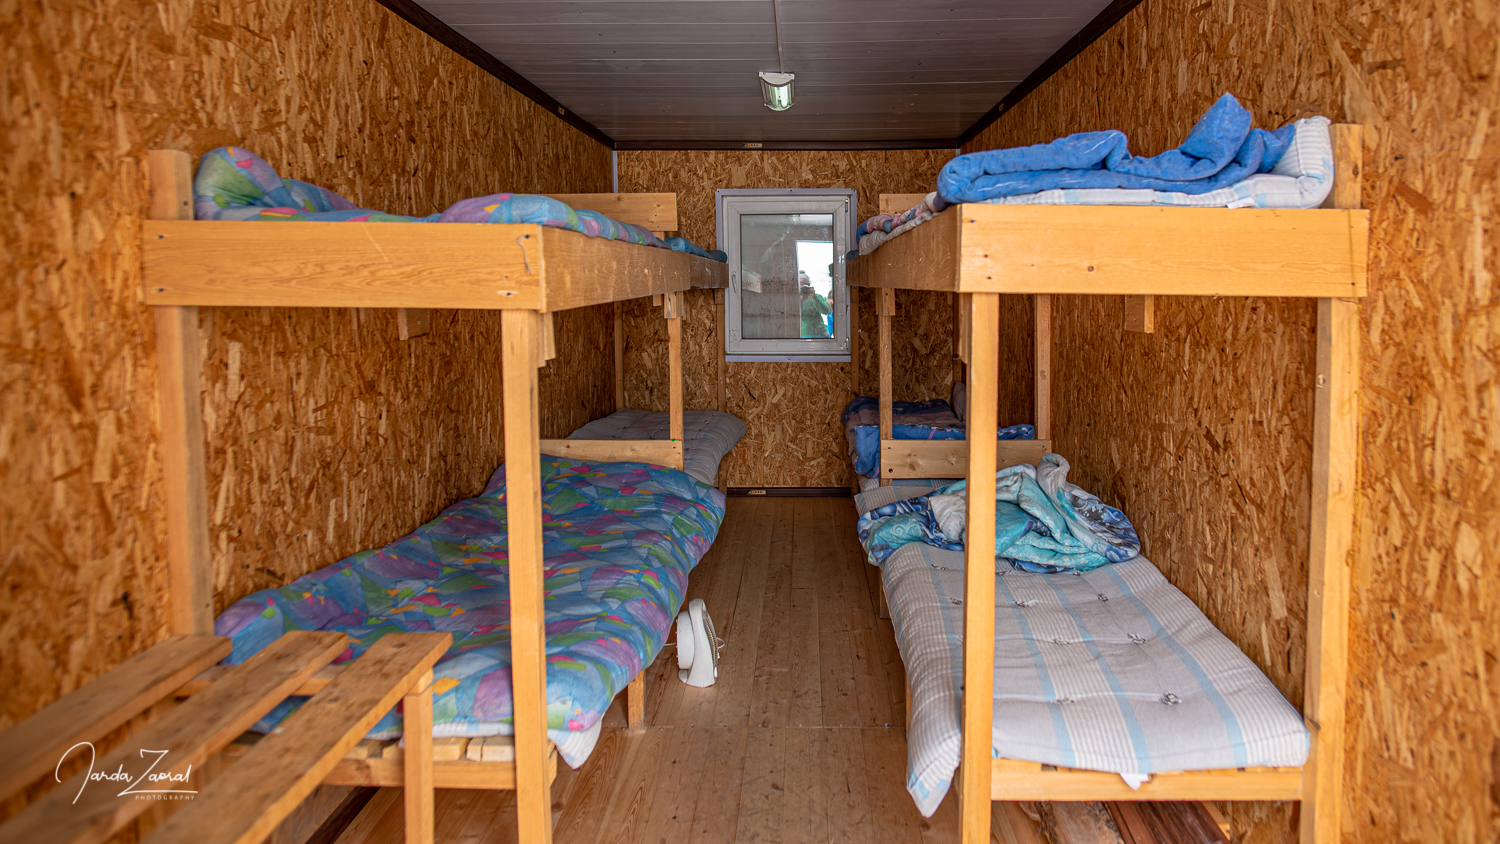 Container housing at Elbrus base camp -picture inside